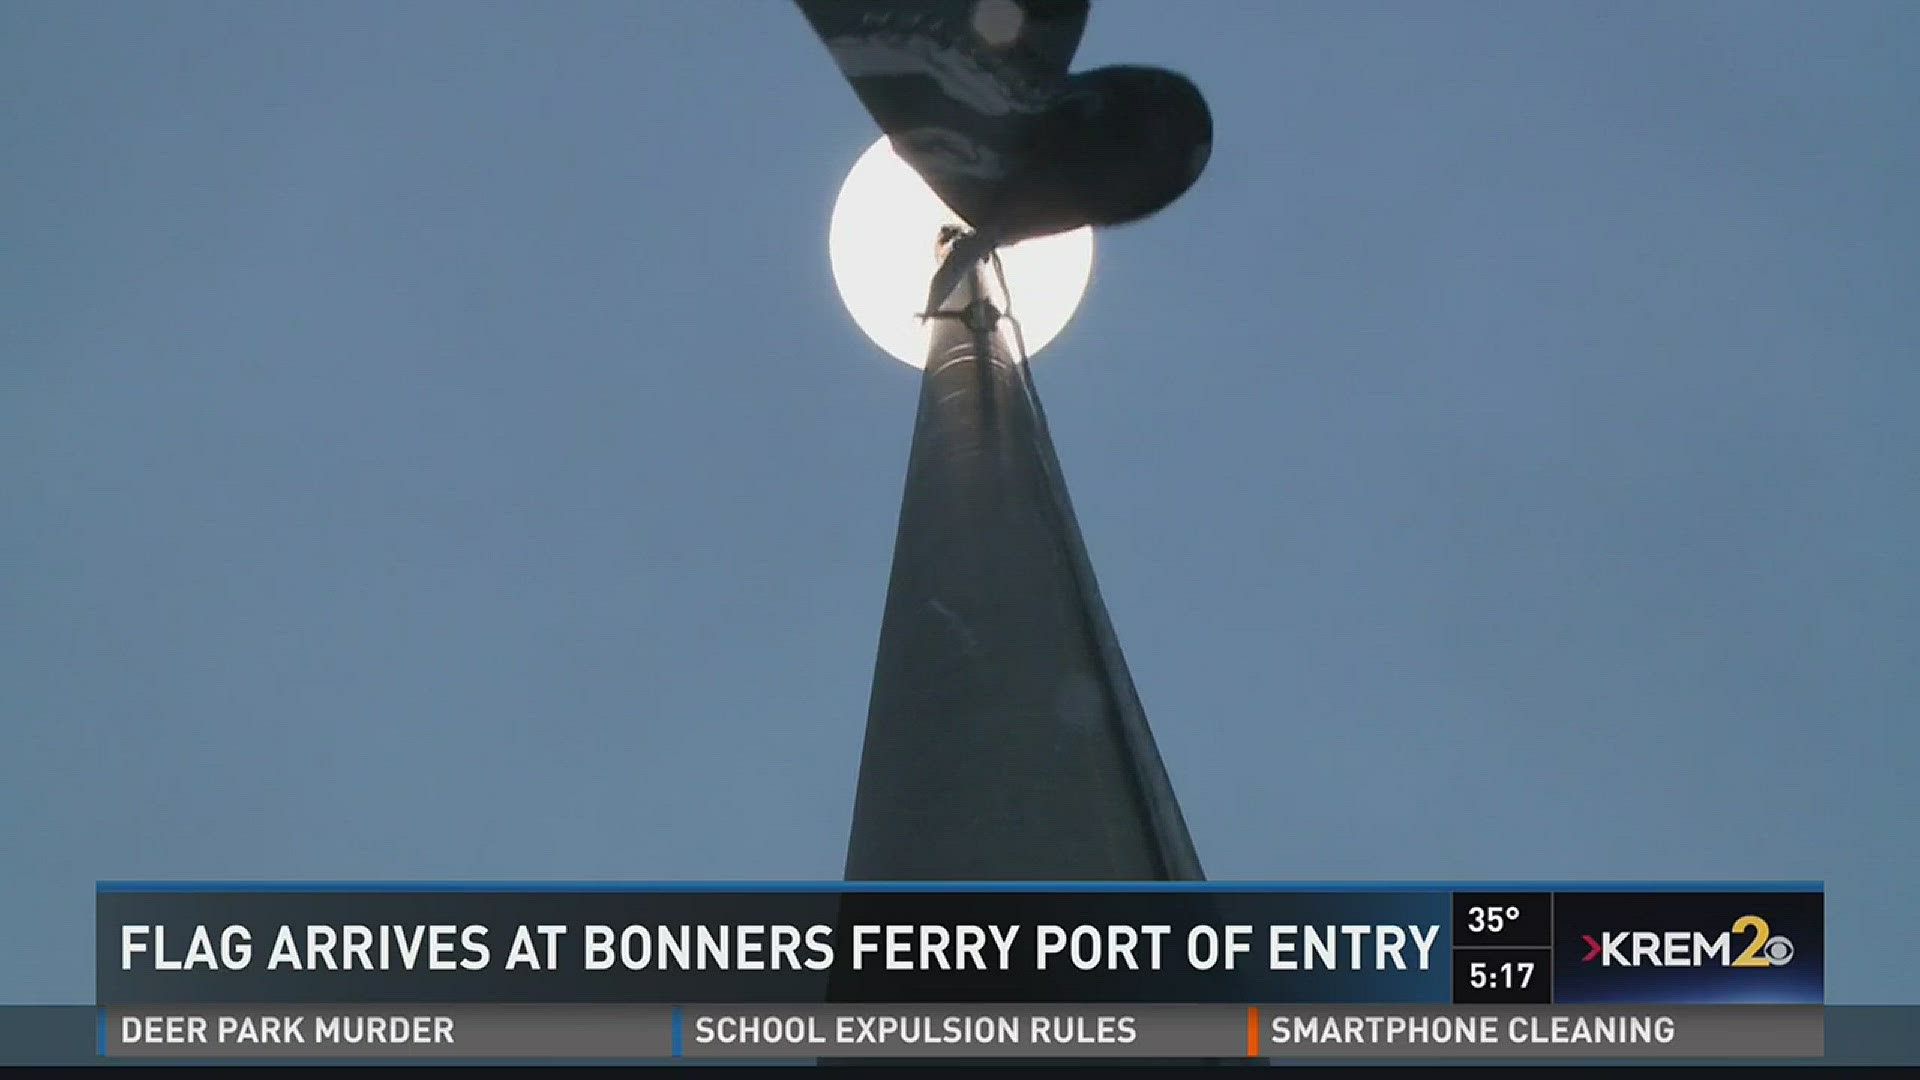 "Old Glory" Stars and Stripes, and the "Red White and Blue." The American Flag is one thing that you won't see at the Bonners Ferry port of entry.